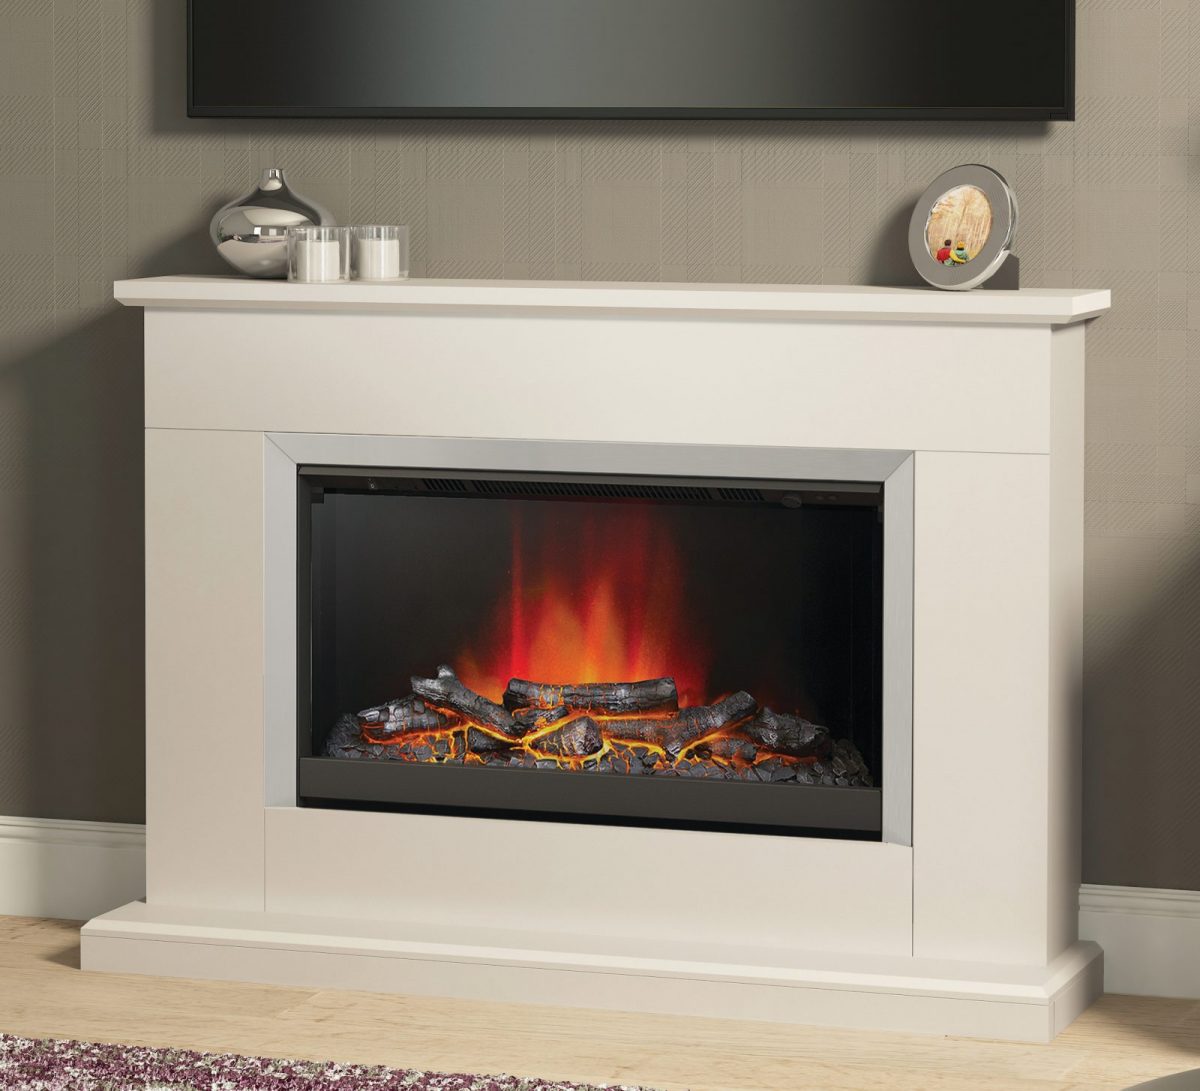 46″ Hansford fireplace in Pearlescent Cashmere painted finish with Brushed Chrome Finished Electric Fire